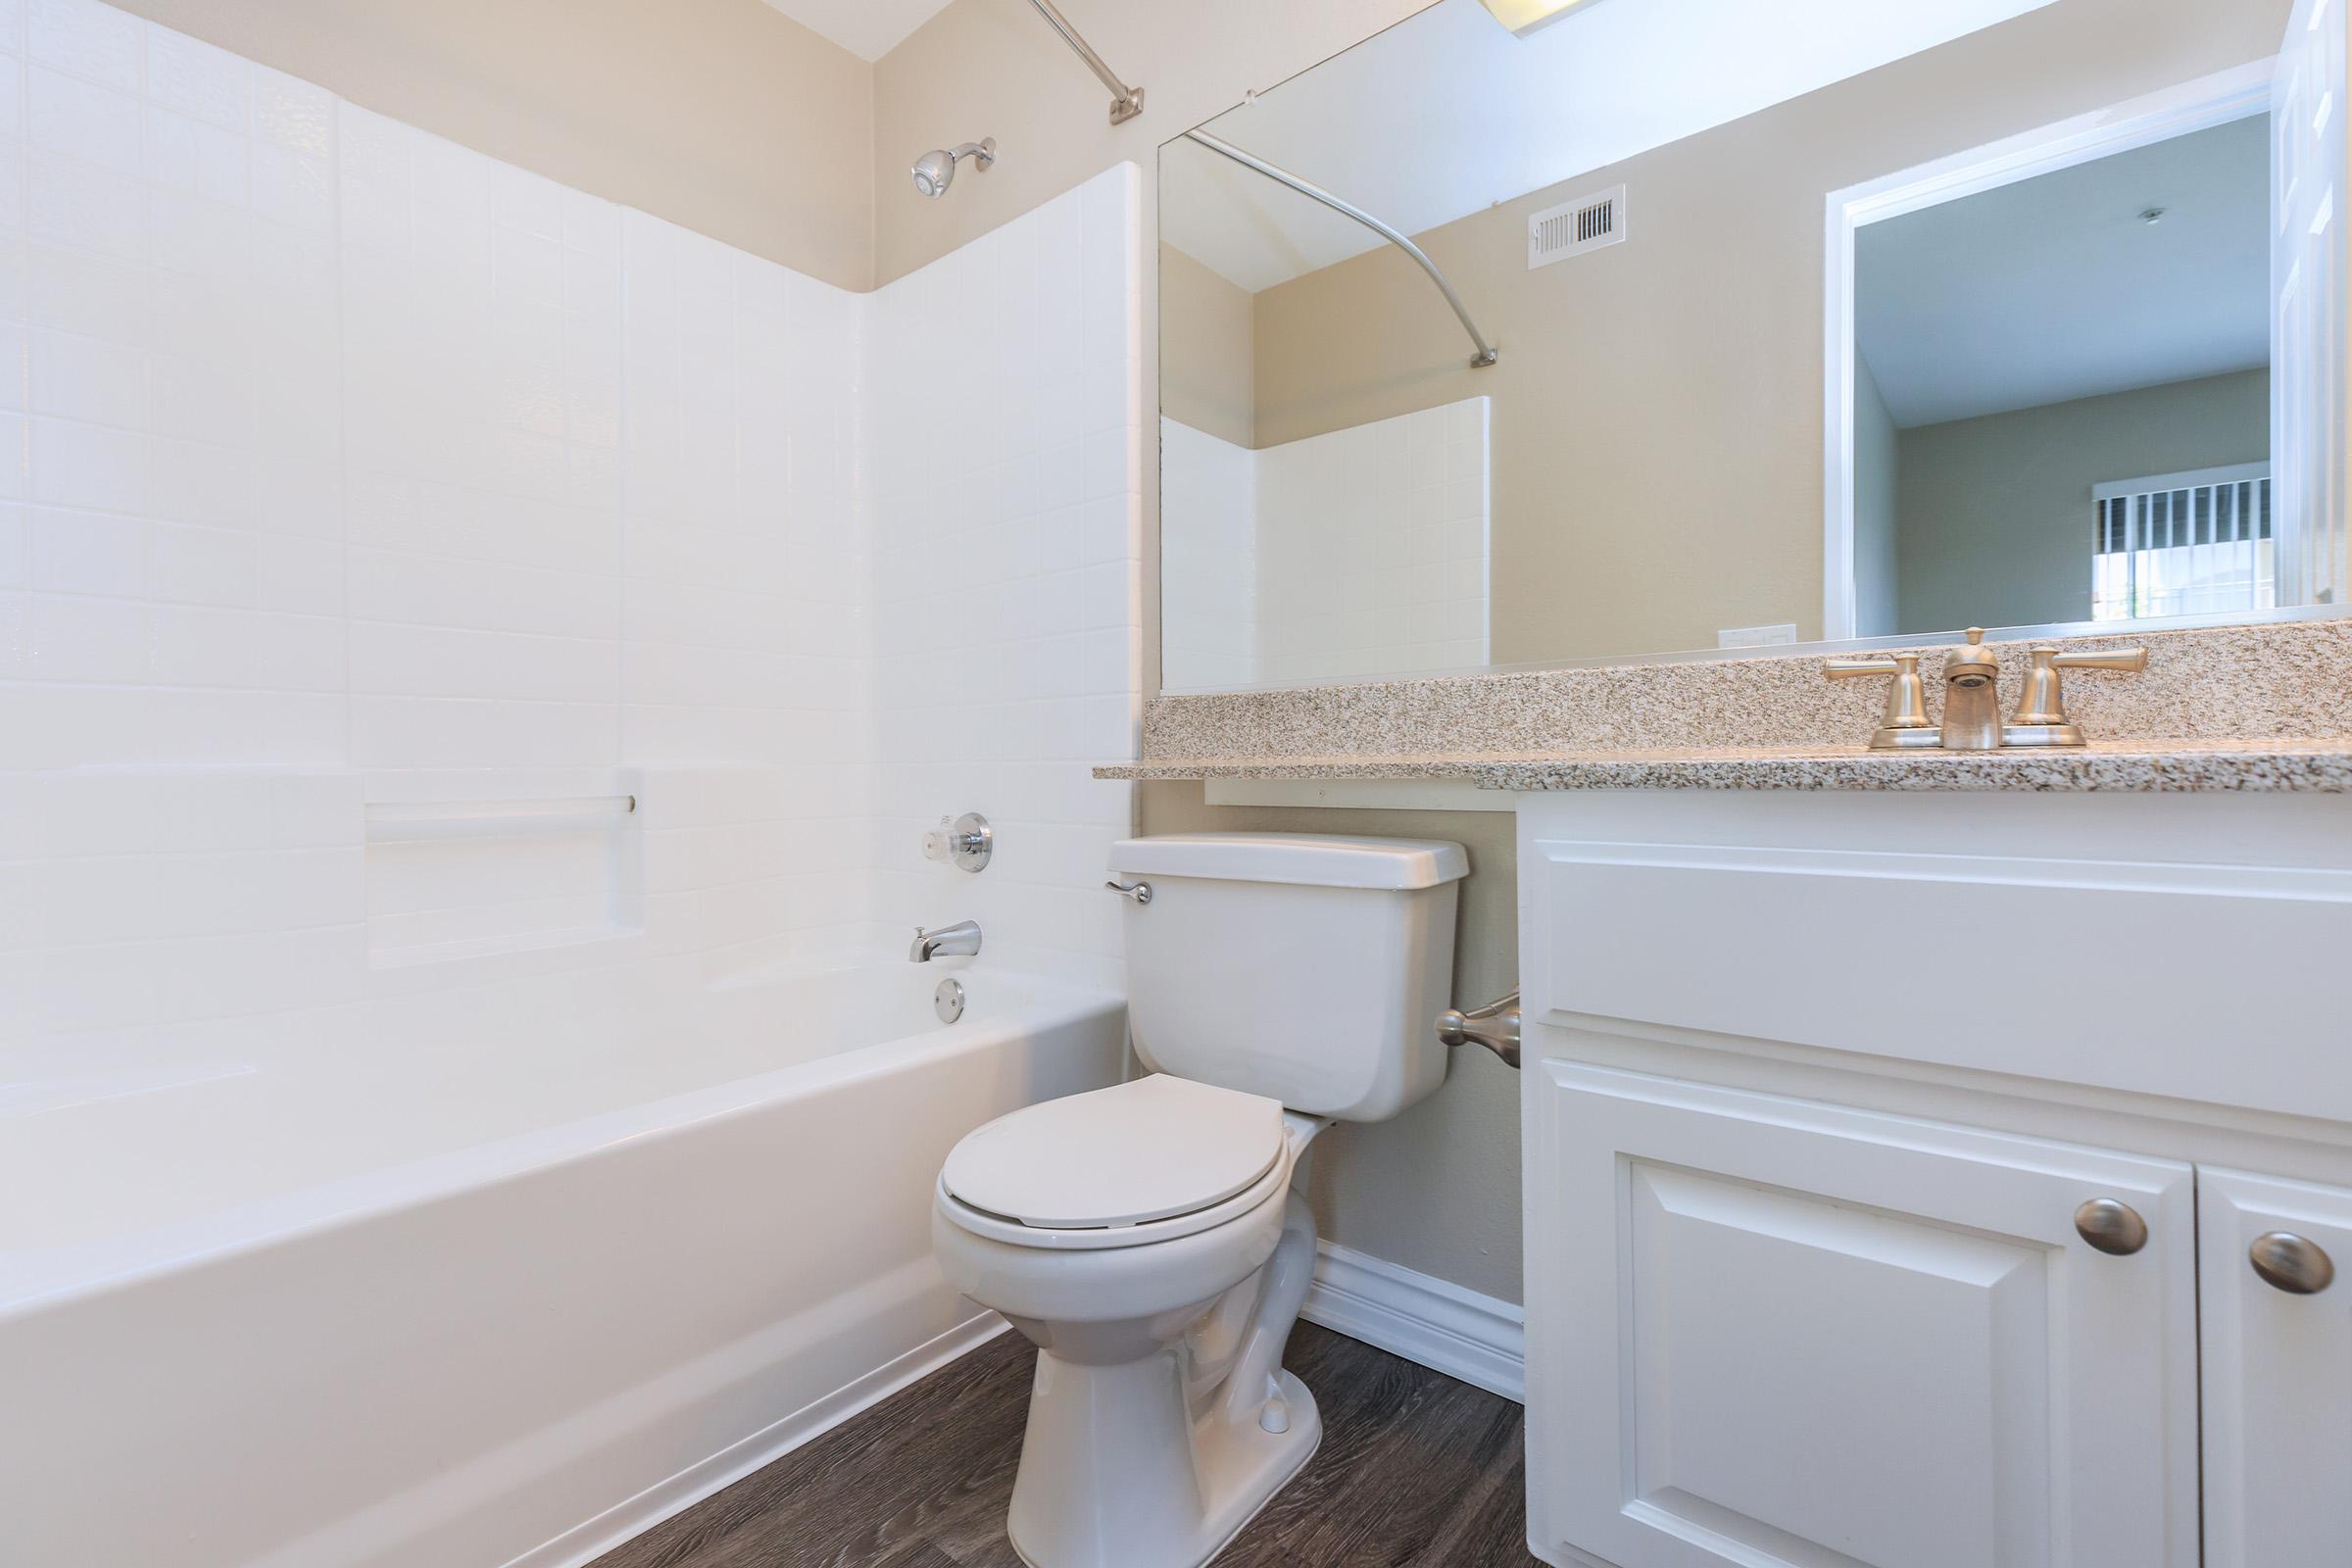 Unfurnished bathroom with white cabinets